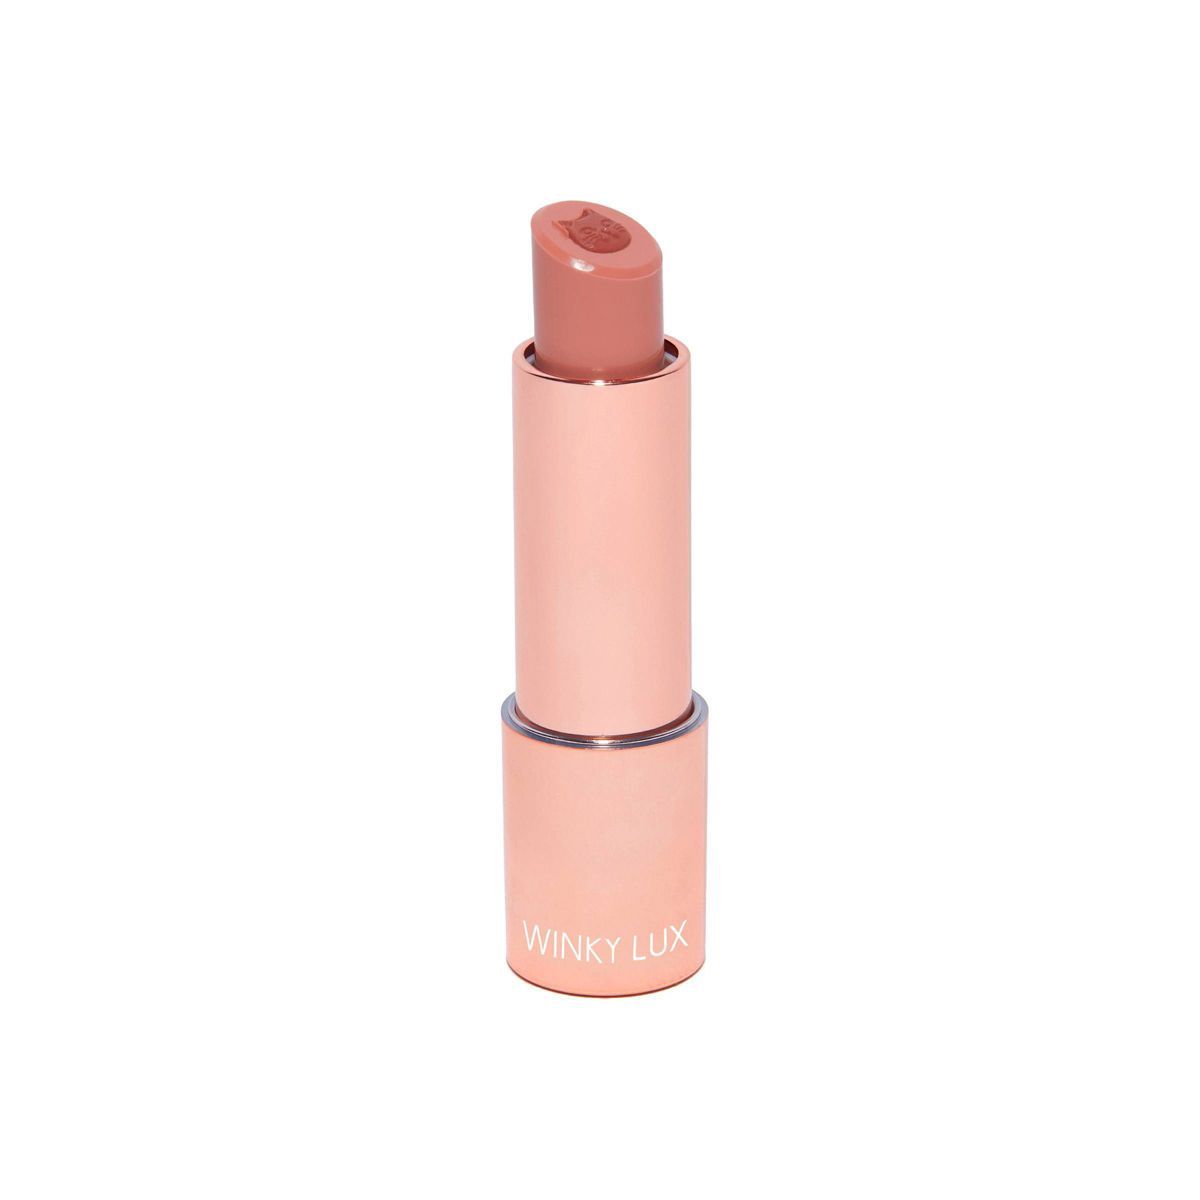 Winky Lux Purrfect Pout Sheer Lipstick - 0.13oz | Target